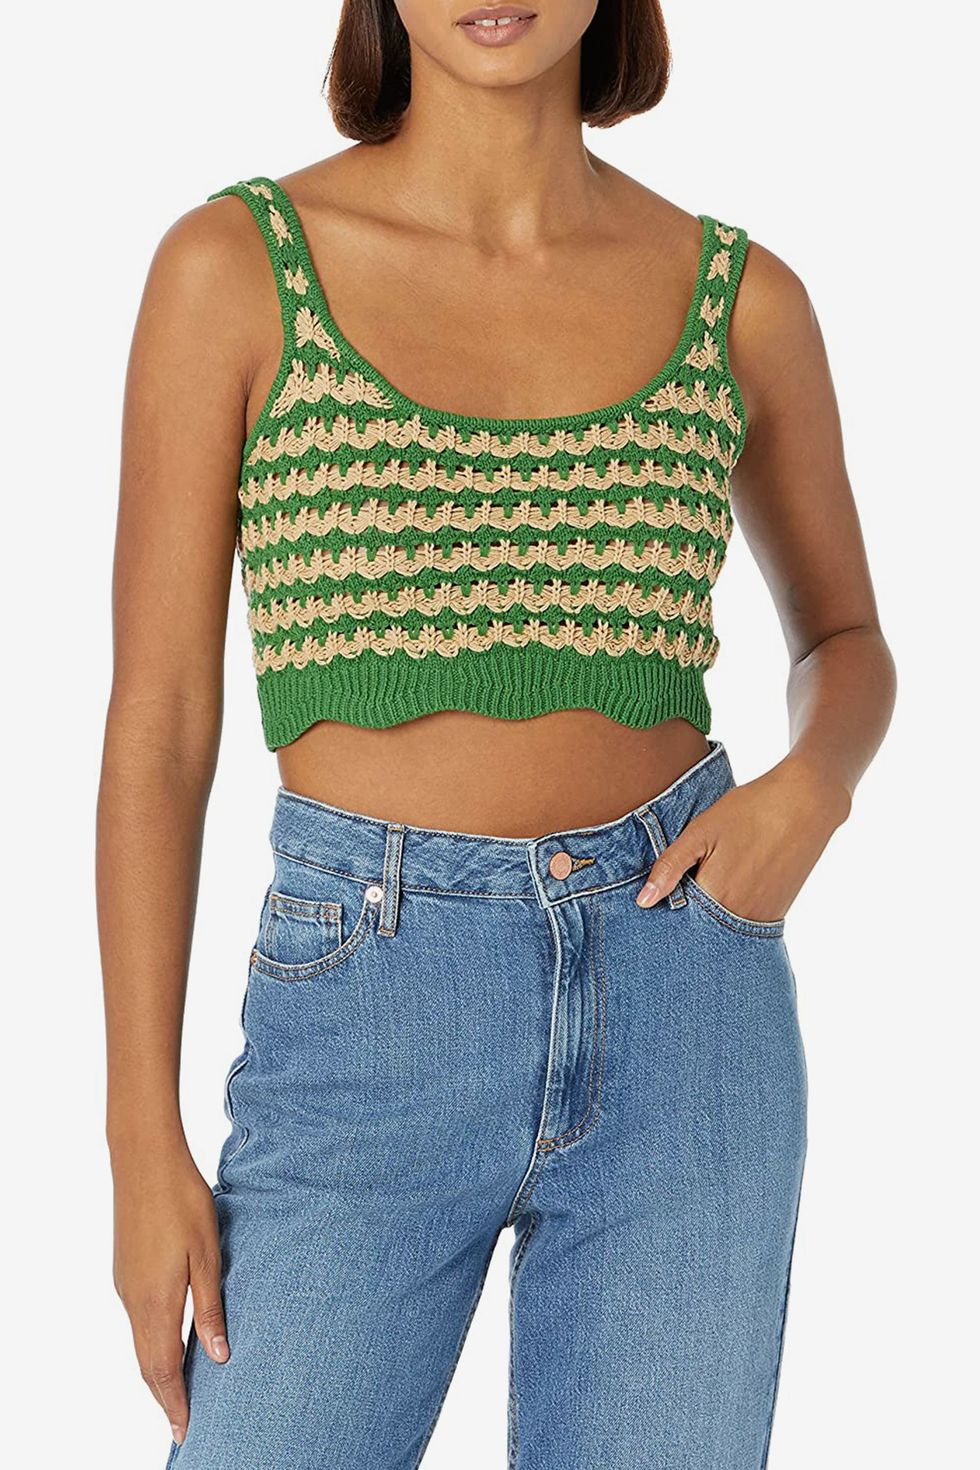 24 Best Crochet Clothing Pieces for Summer — Best Crochet Tops and